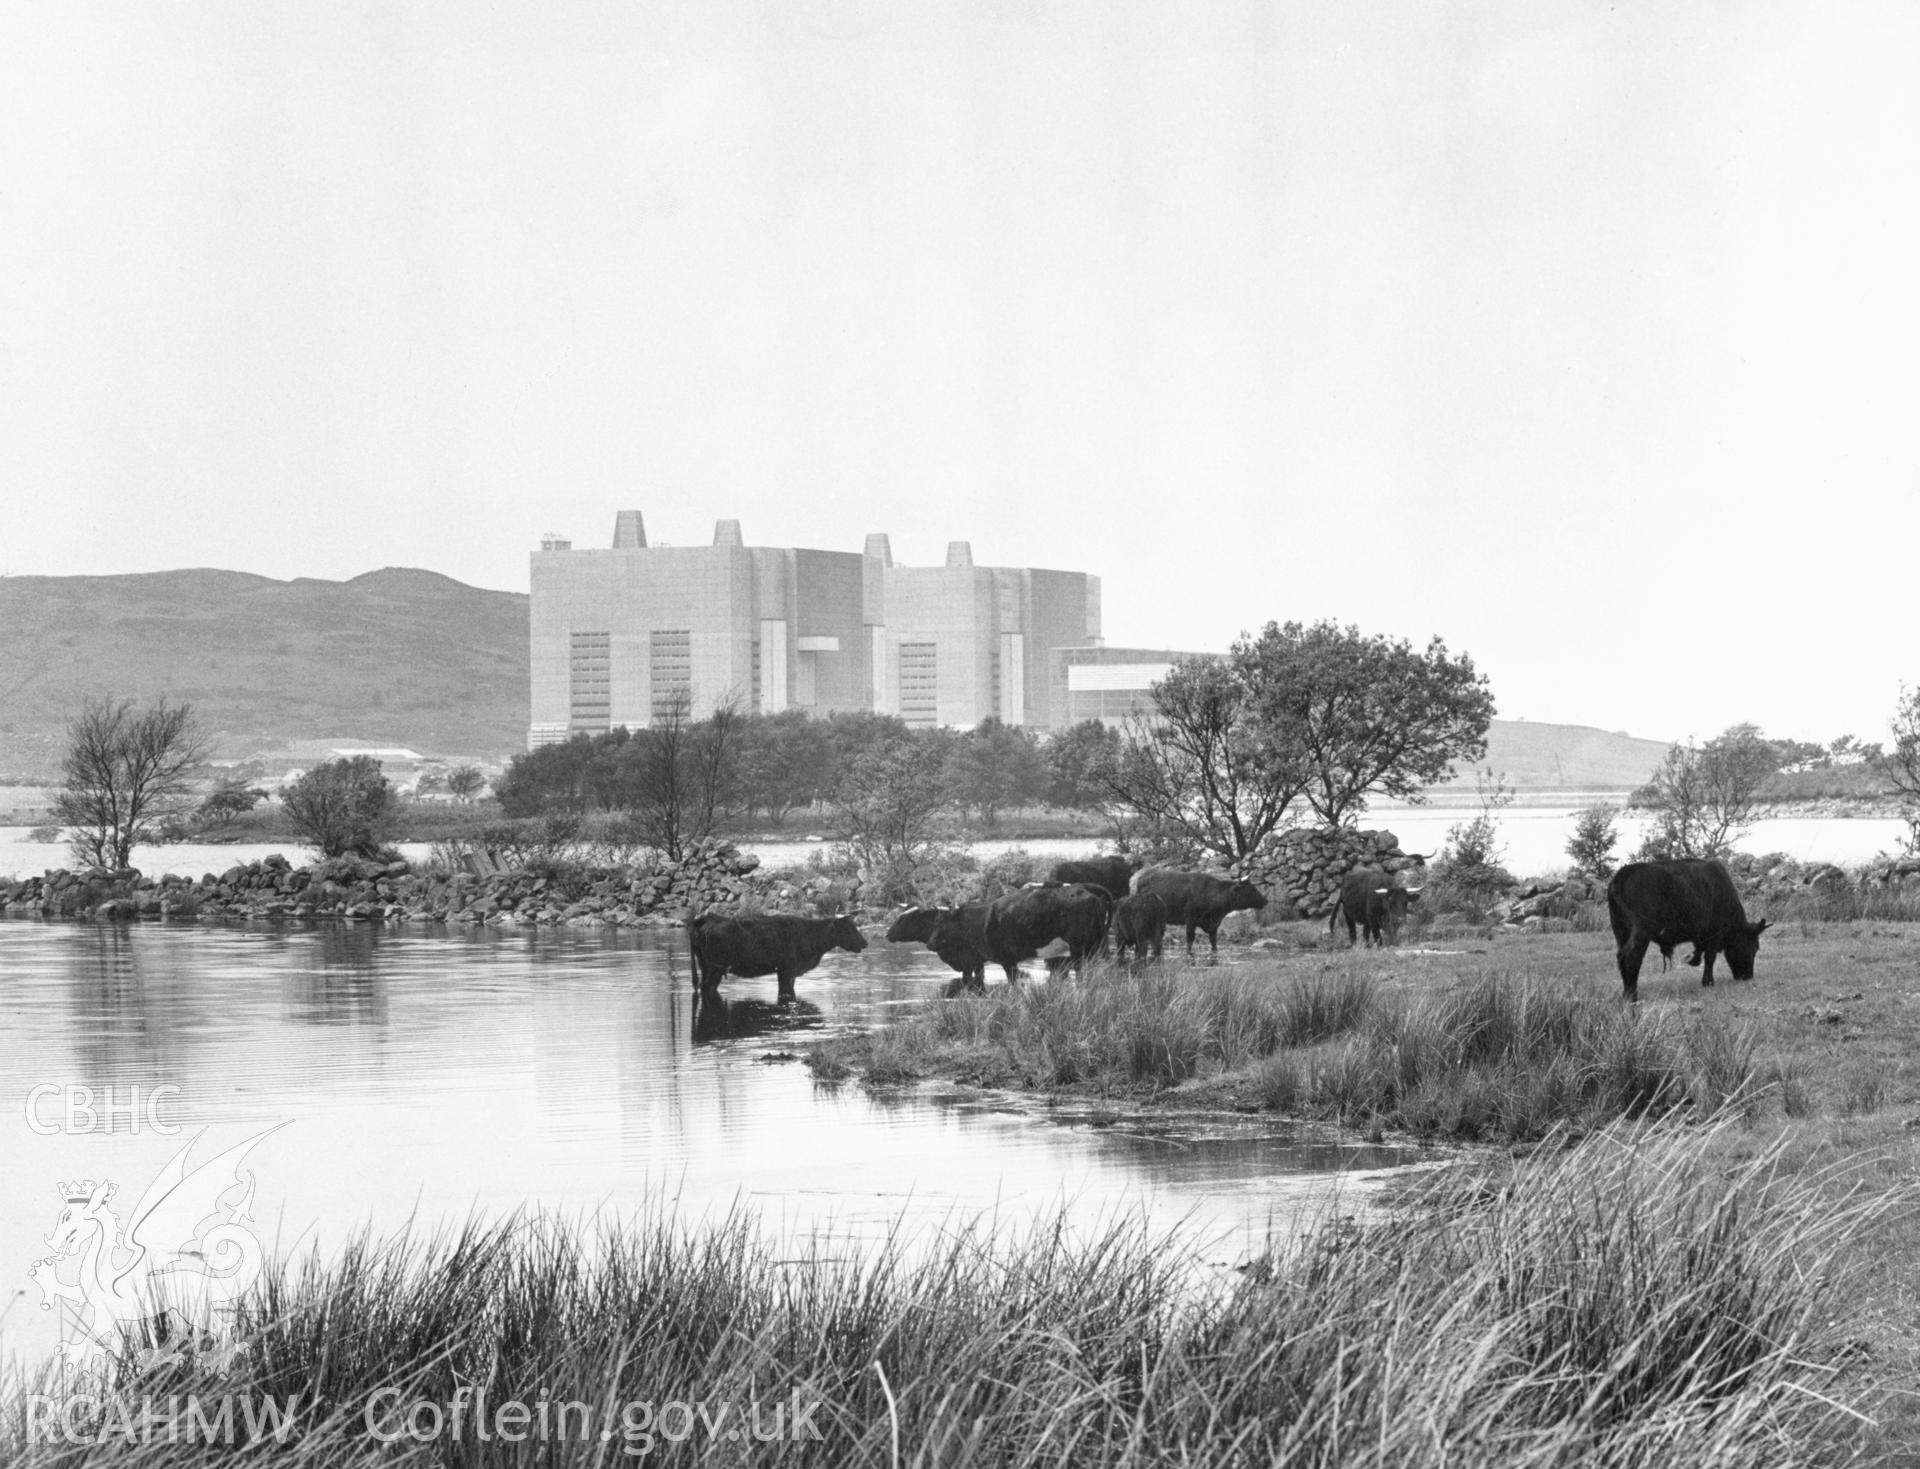 1 b/w print showing exterior view of Trawsfynydd Power Station with cows in foreground; collated by the former Central Office of Information.